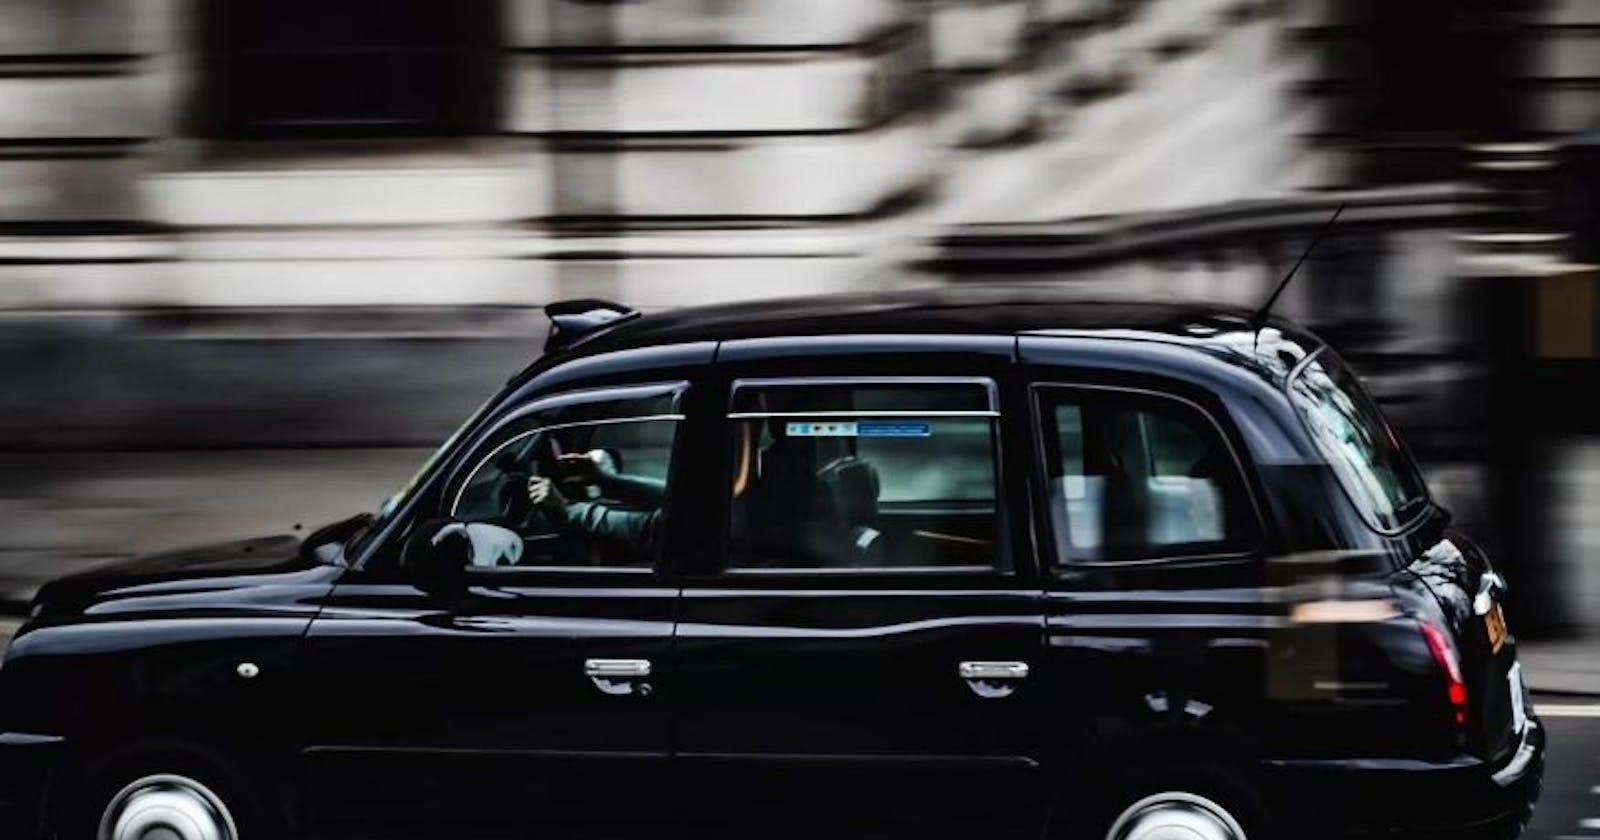 How Can Your Journey Be Improved By Our Bridport Taxis Service In The UK?